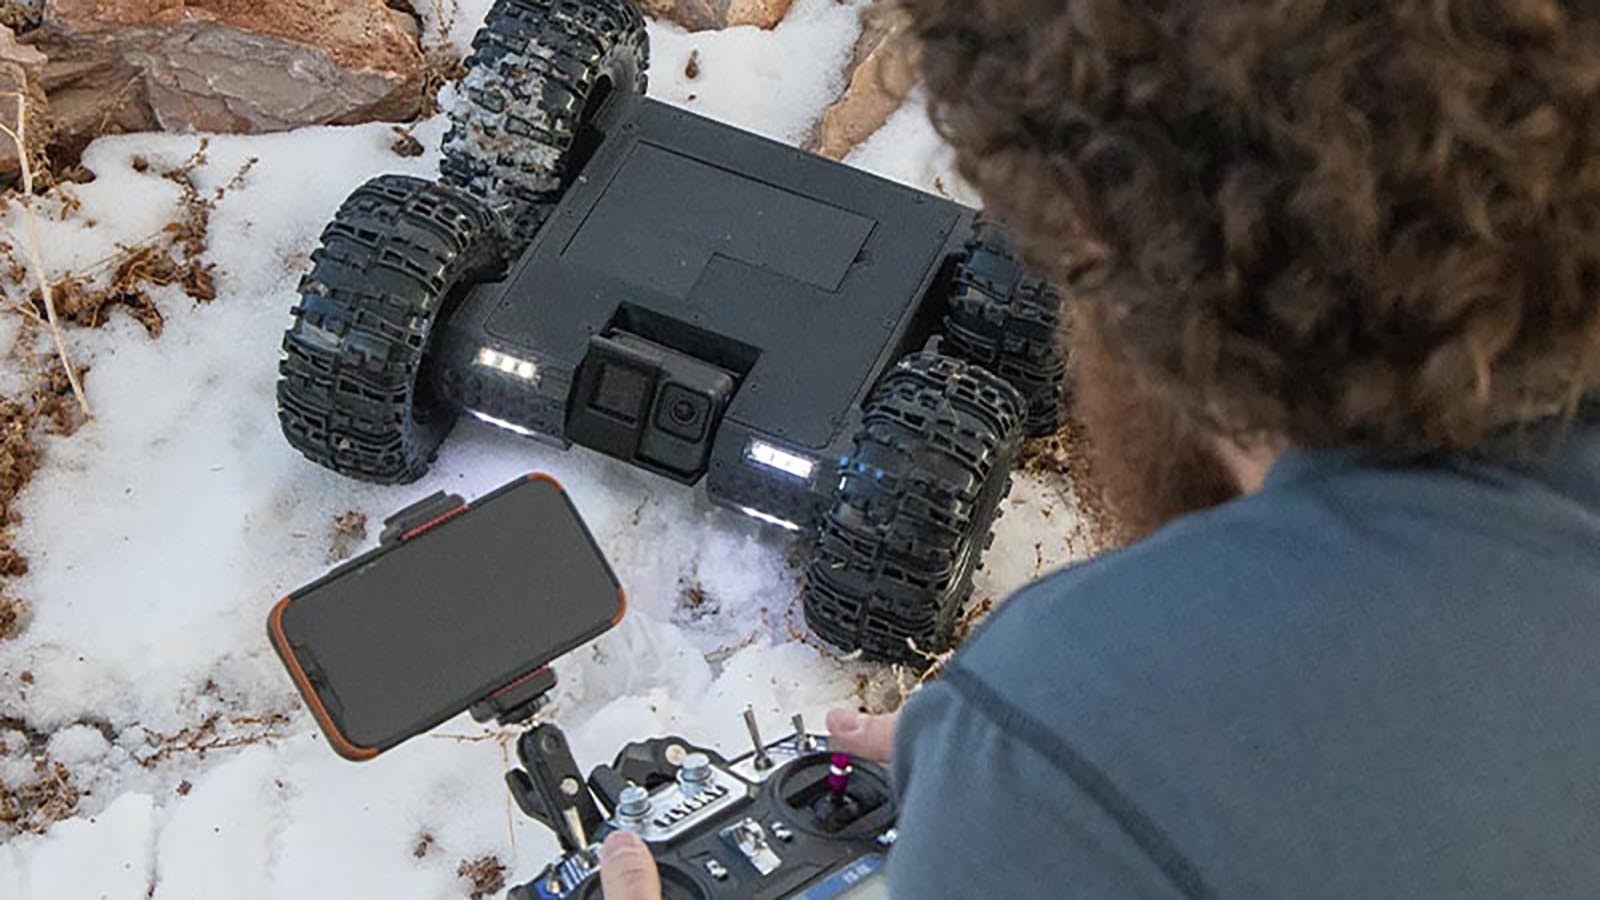 UplinkRobotics is the result of four University of Wyoming students who leveraged imagination and technology to create a company that's revolutionizing the inspection industry with some pretty cool robots.